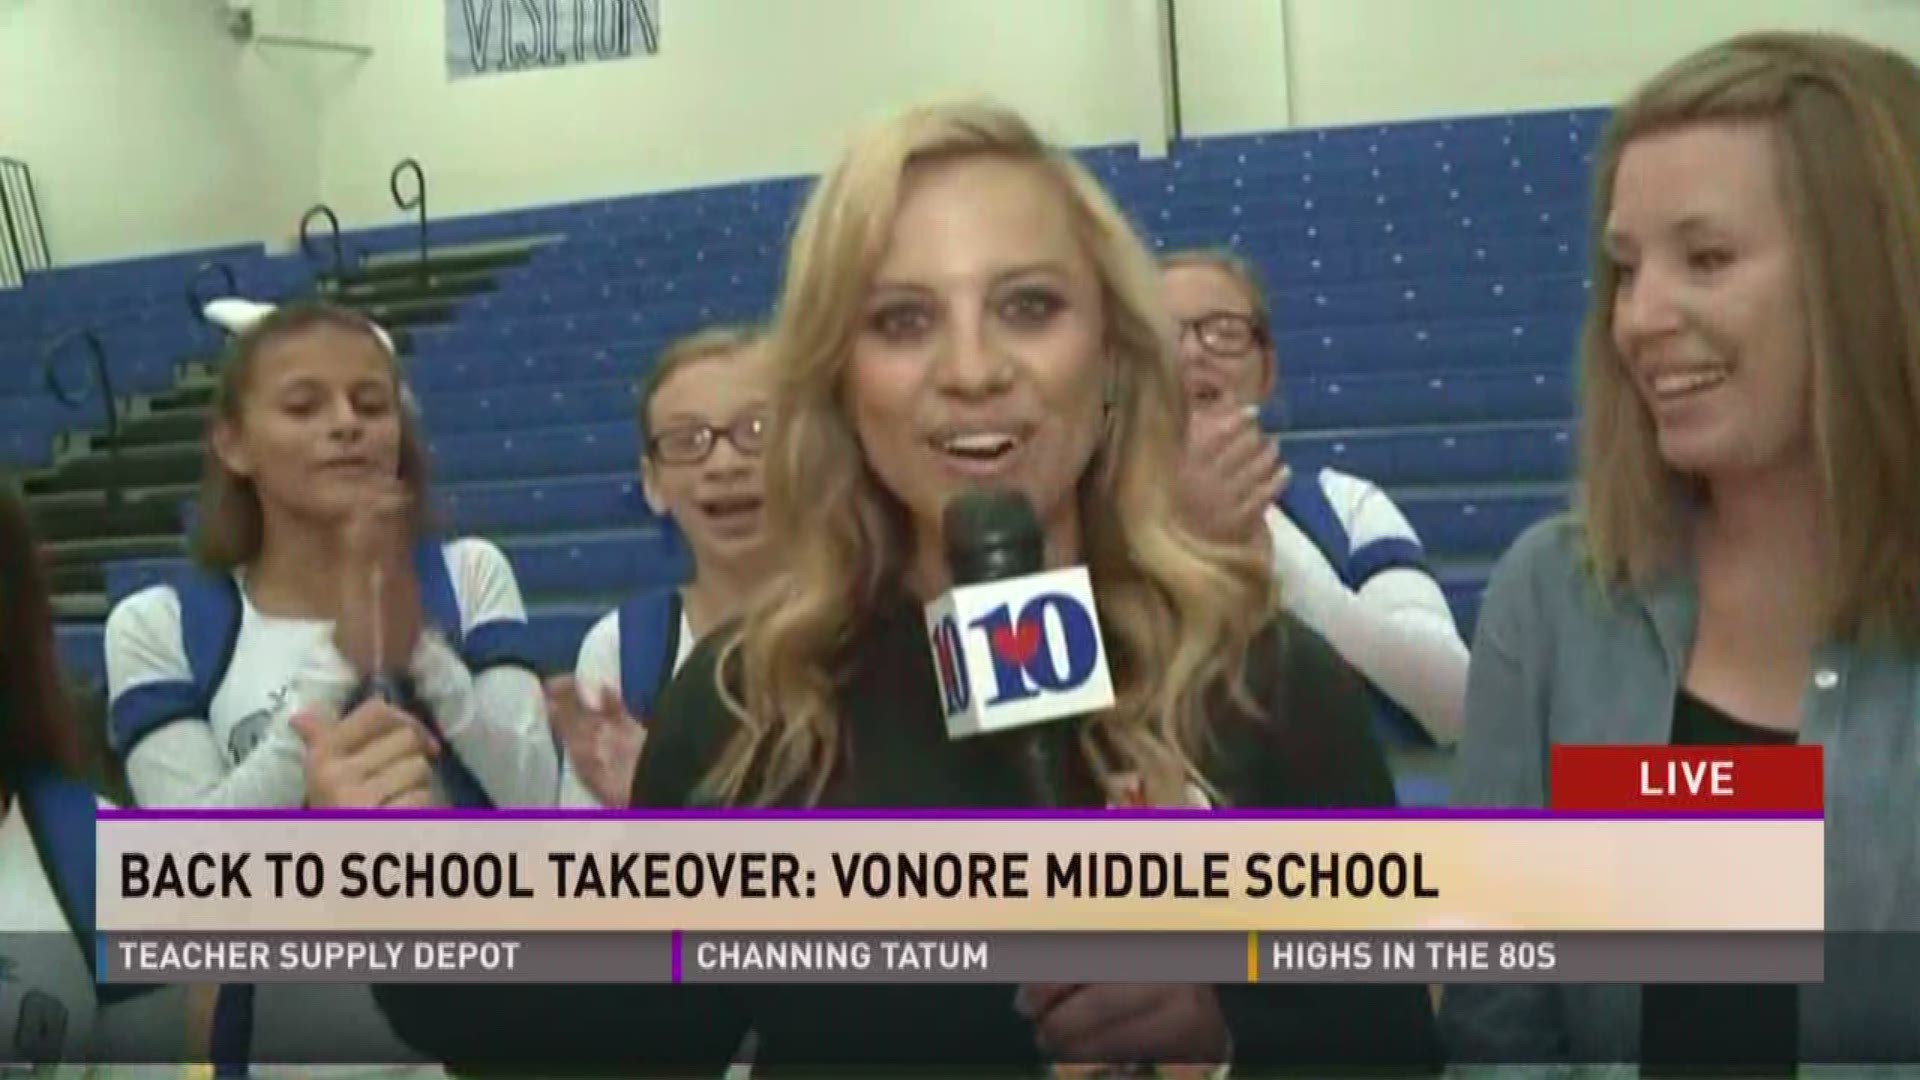 WBIR 10News anchor Abby Ham has a lot of fun at Vonore Middle School's first day back to school.